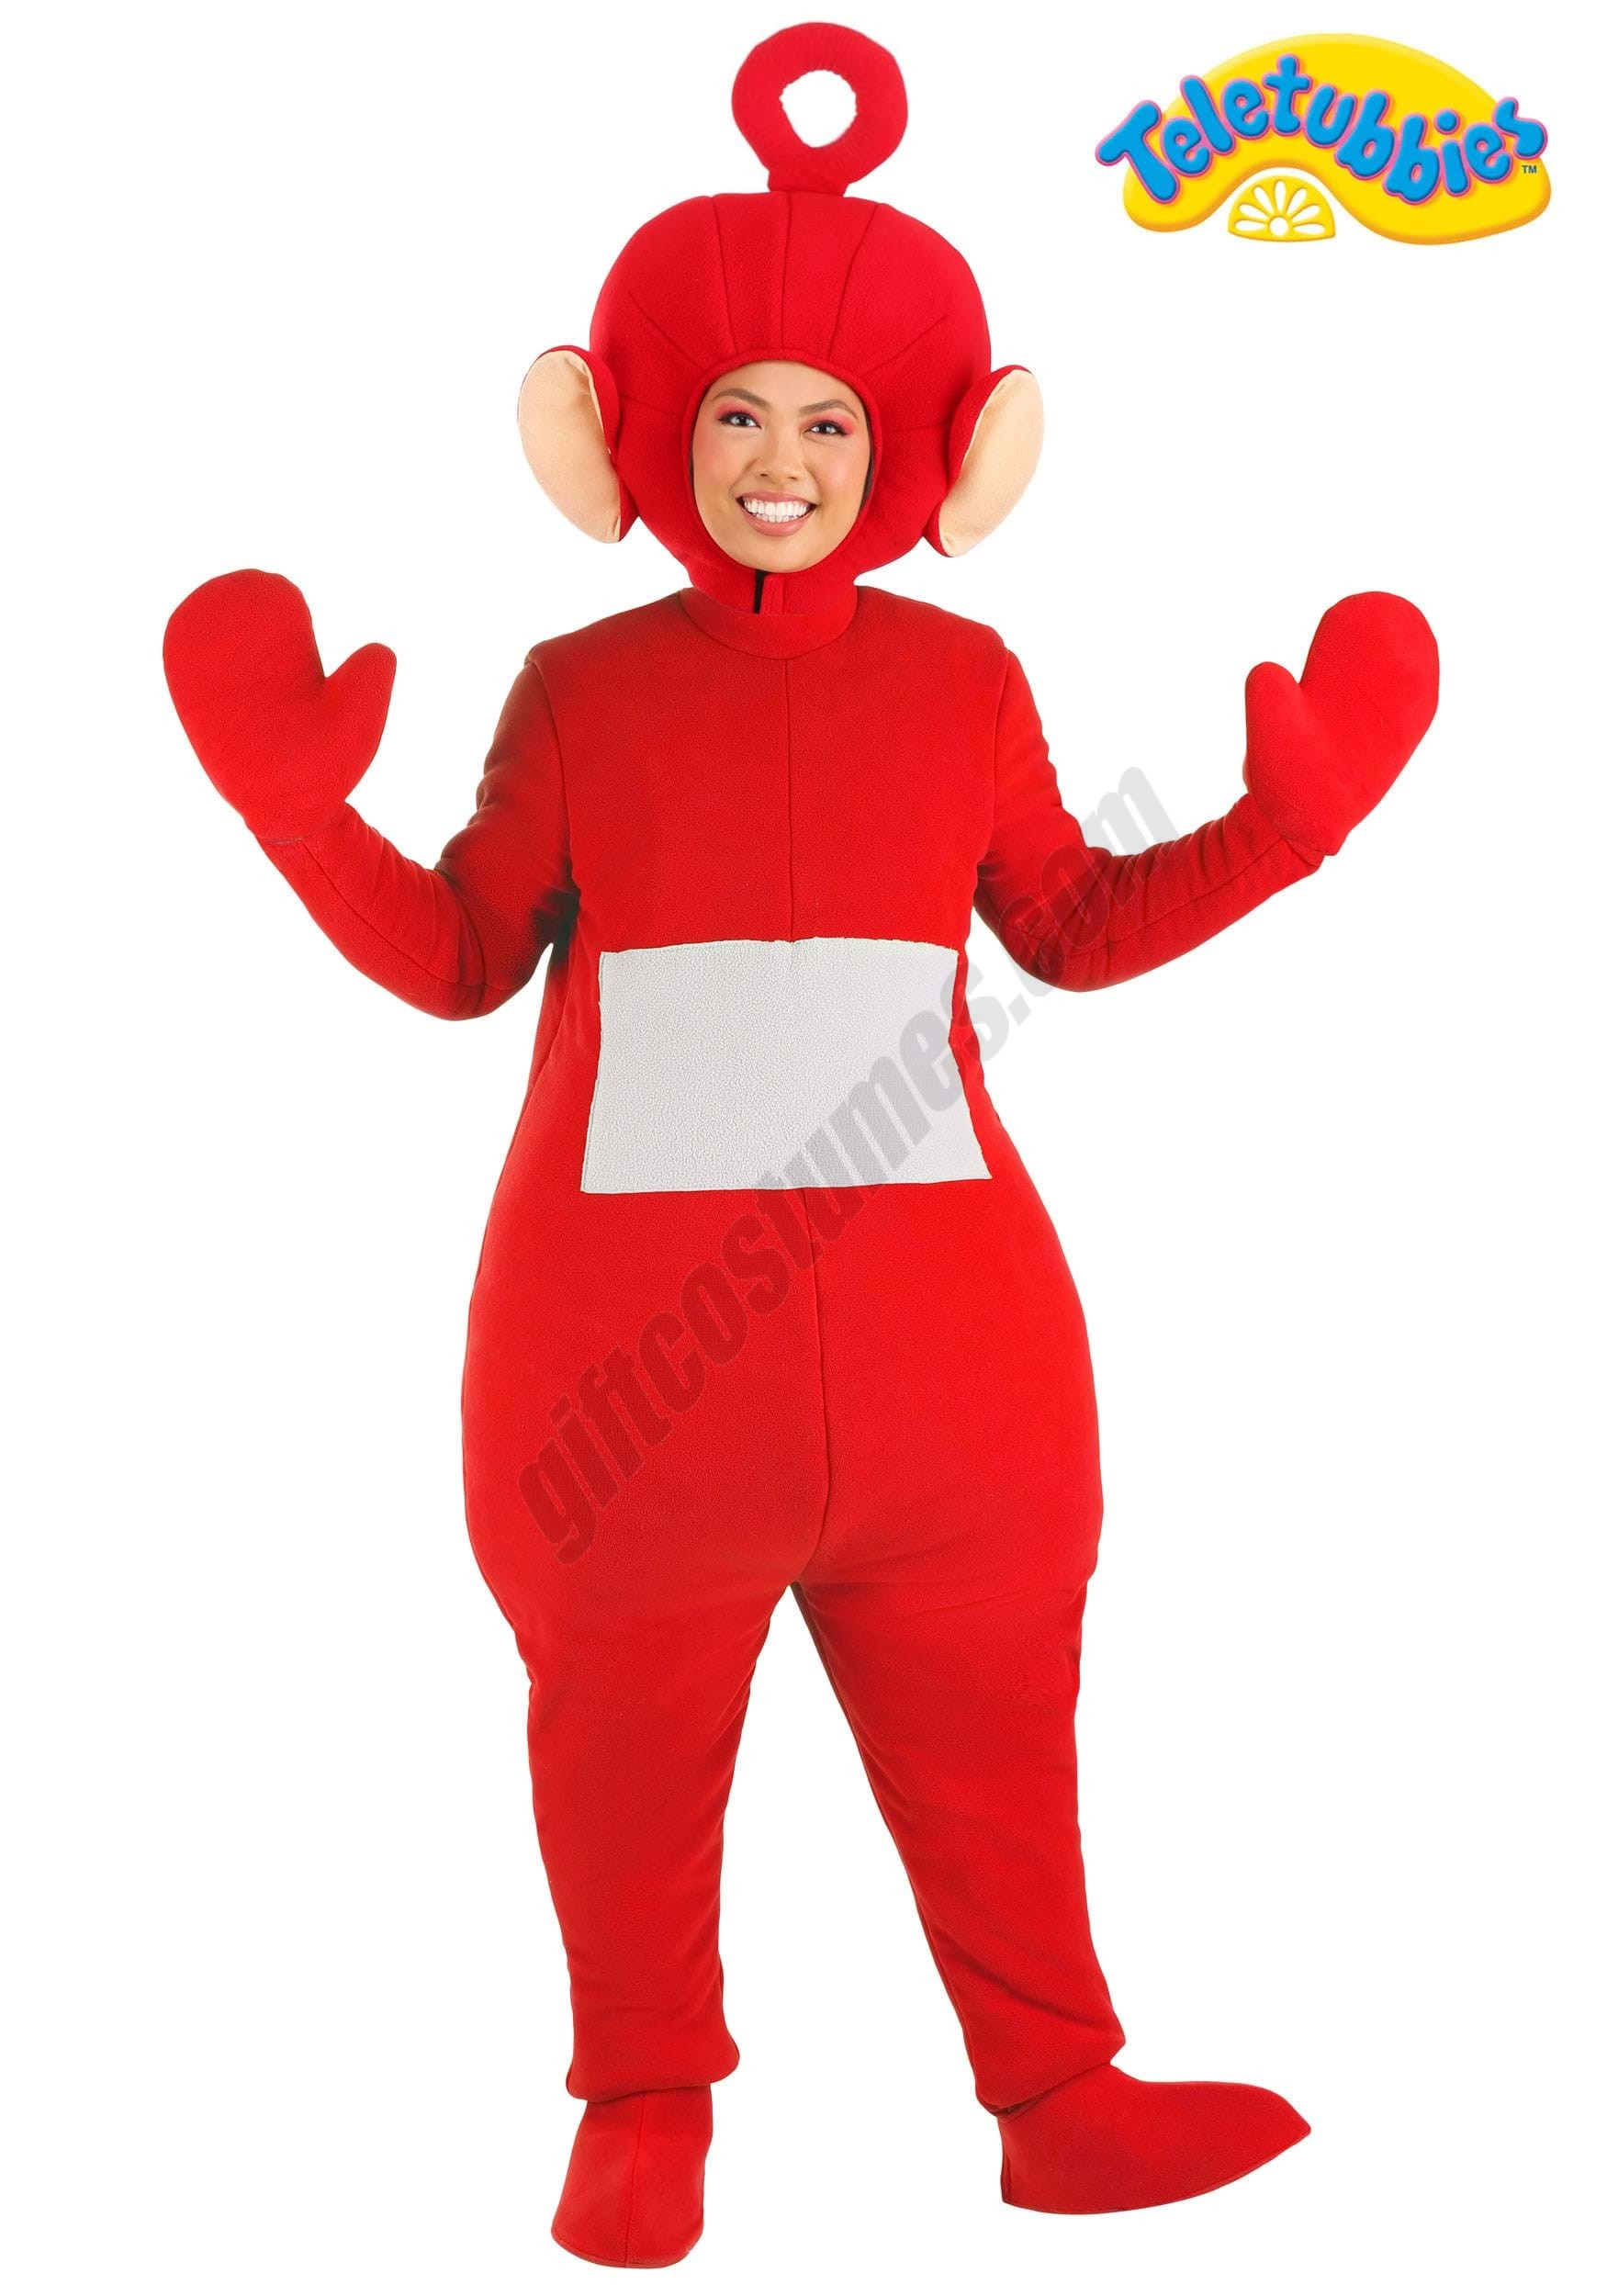 Plus Size Po Teletubbies Costume for Adults Promotions - Plus Size Po Teletubbies Costume for Adults Promotions